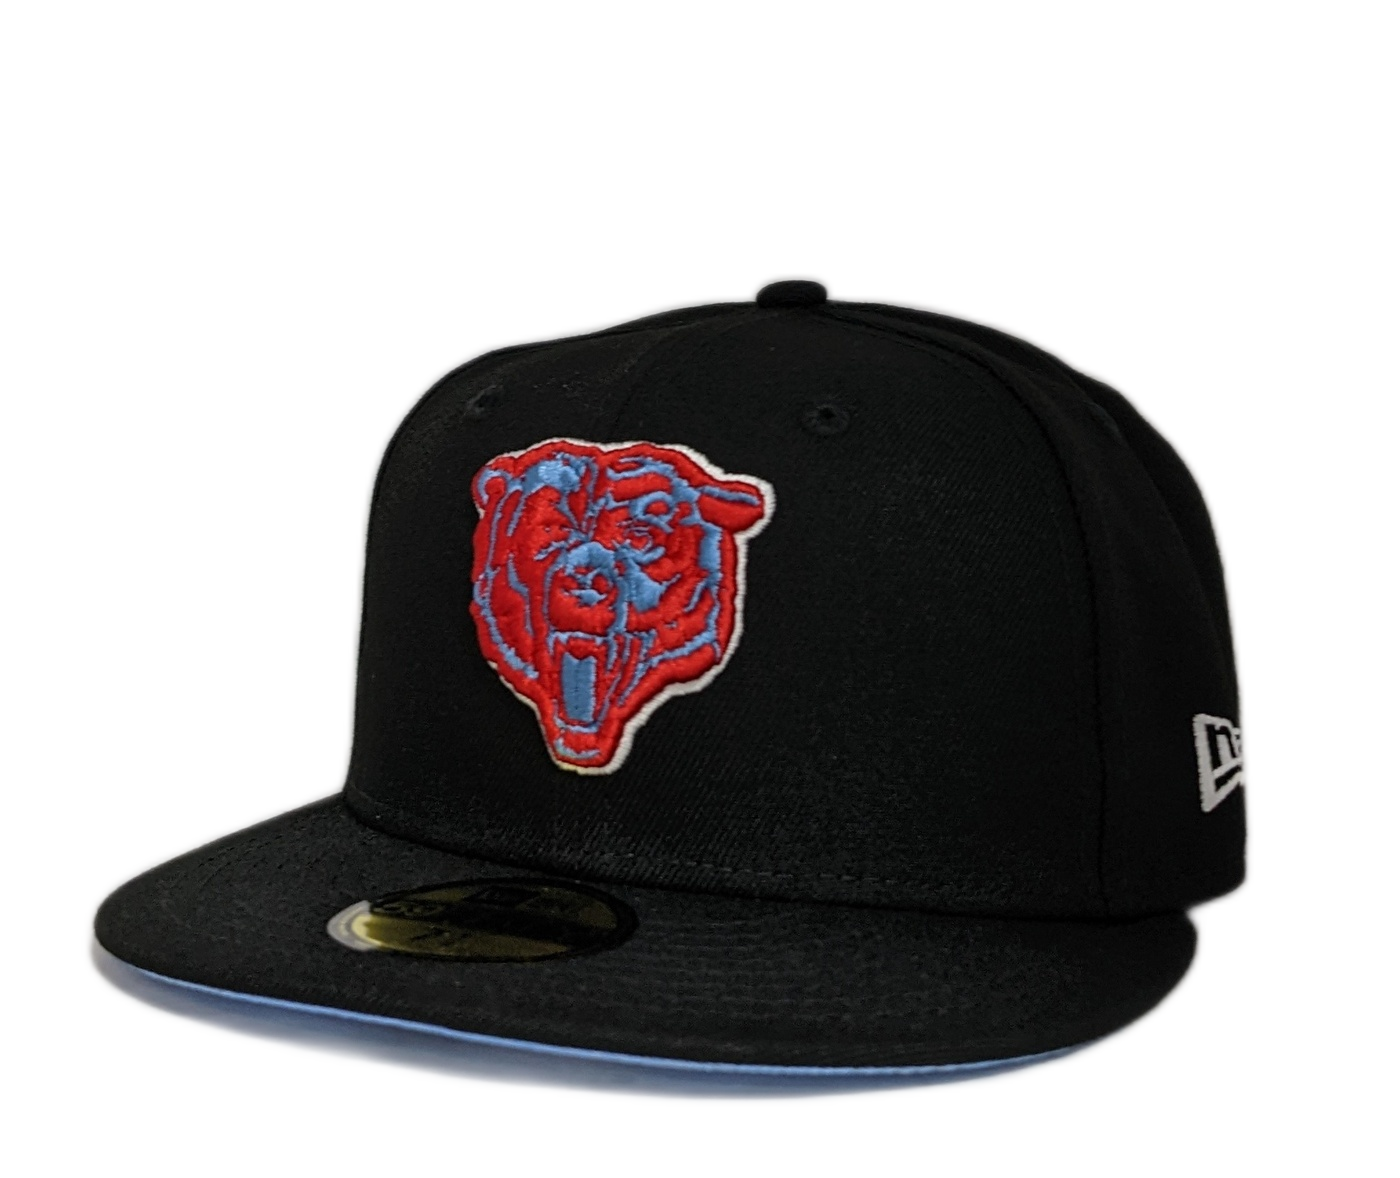 Chicago Bears Monsters of the Midway Black/Sky Blue City Vibes New Era 59FIFTY Fitted Hat